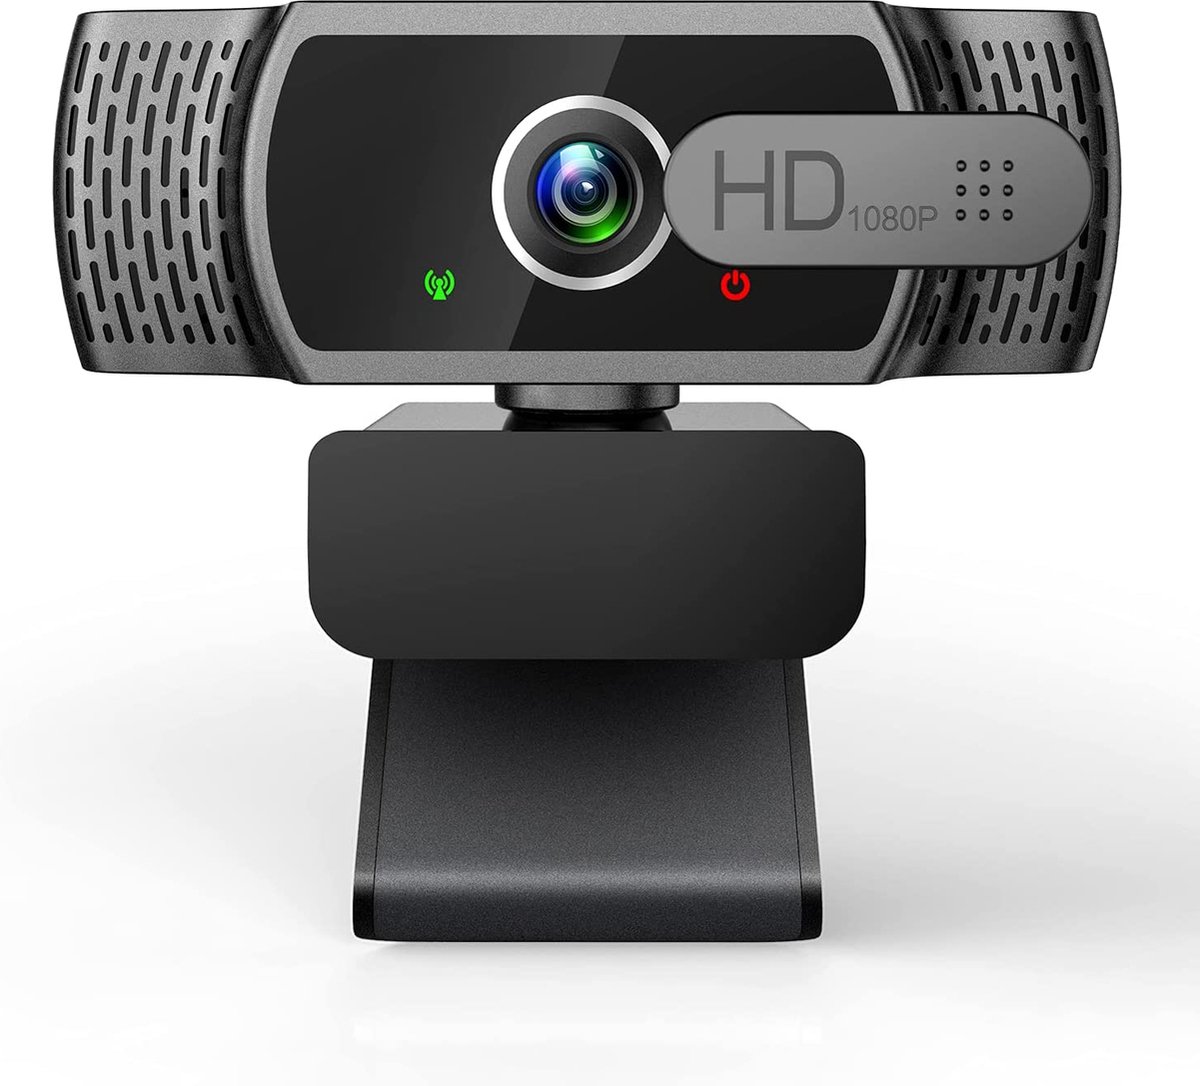 Webcam, webcam with microphone, 1080P camera with cover, USB 2.0 plug & play, webcam for PC and laptop video conferences, online lessons and live streaming, compatible with Windows, Linux and MacOS, black.